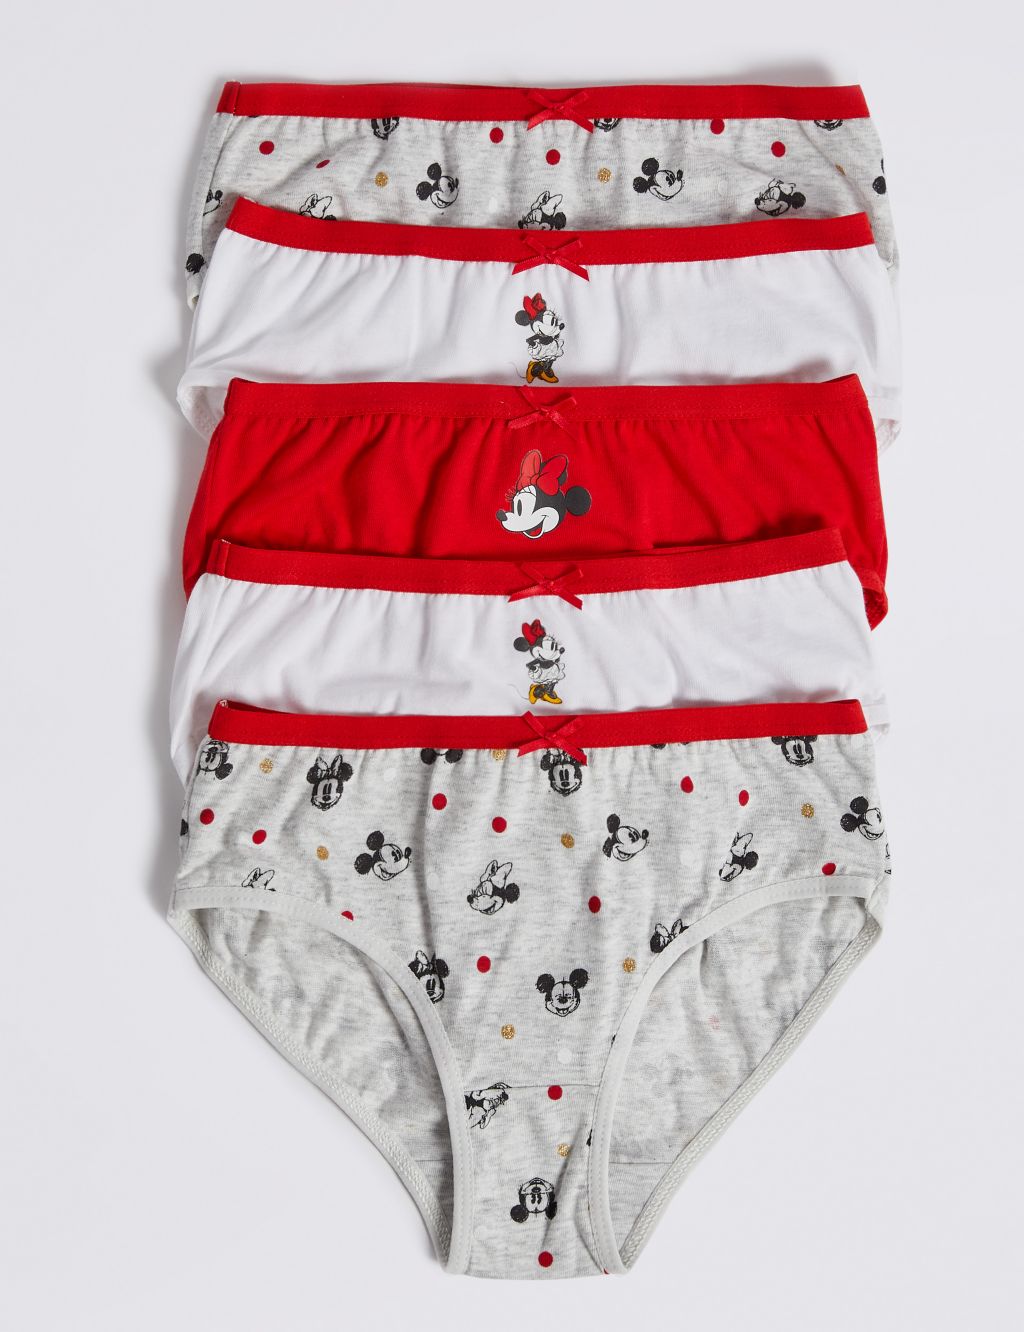 Buy Disney Minnie Mouse Briefs 5 Pack 9-10 years, Underwear, socks and  tights